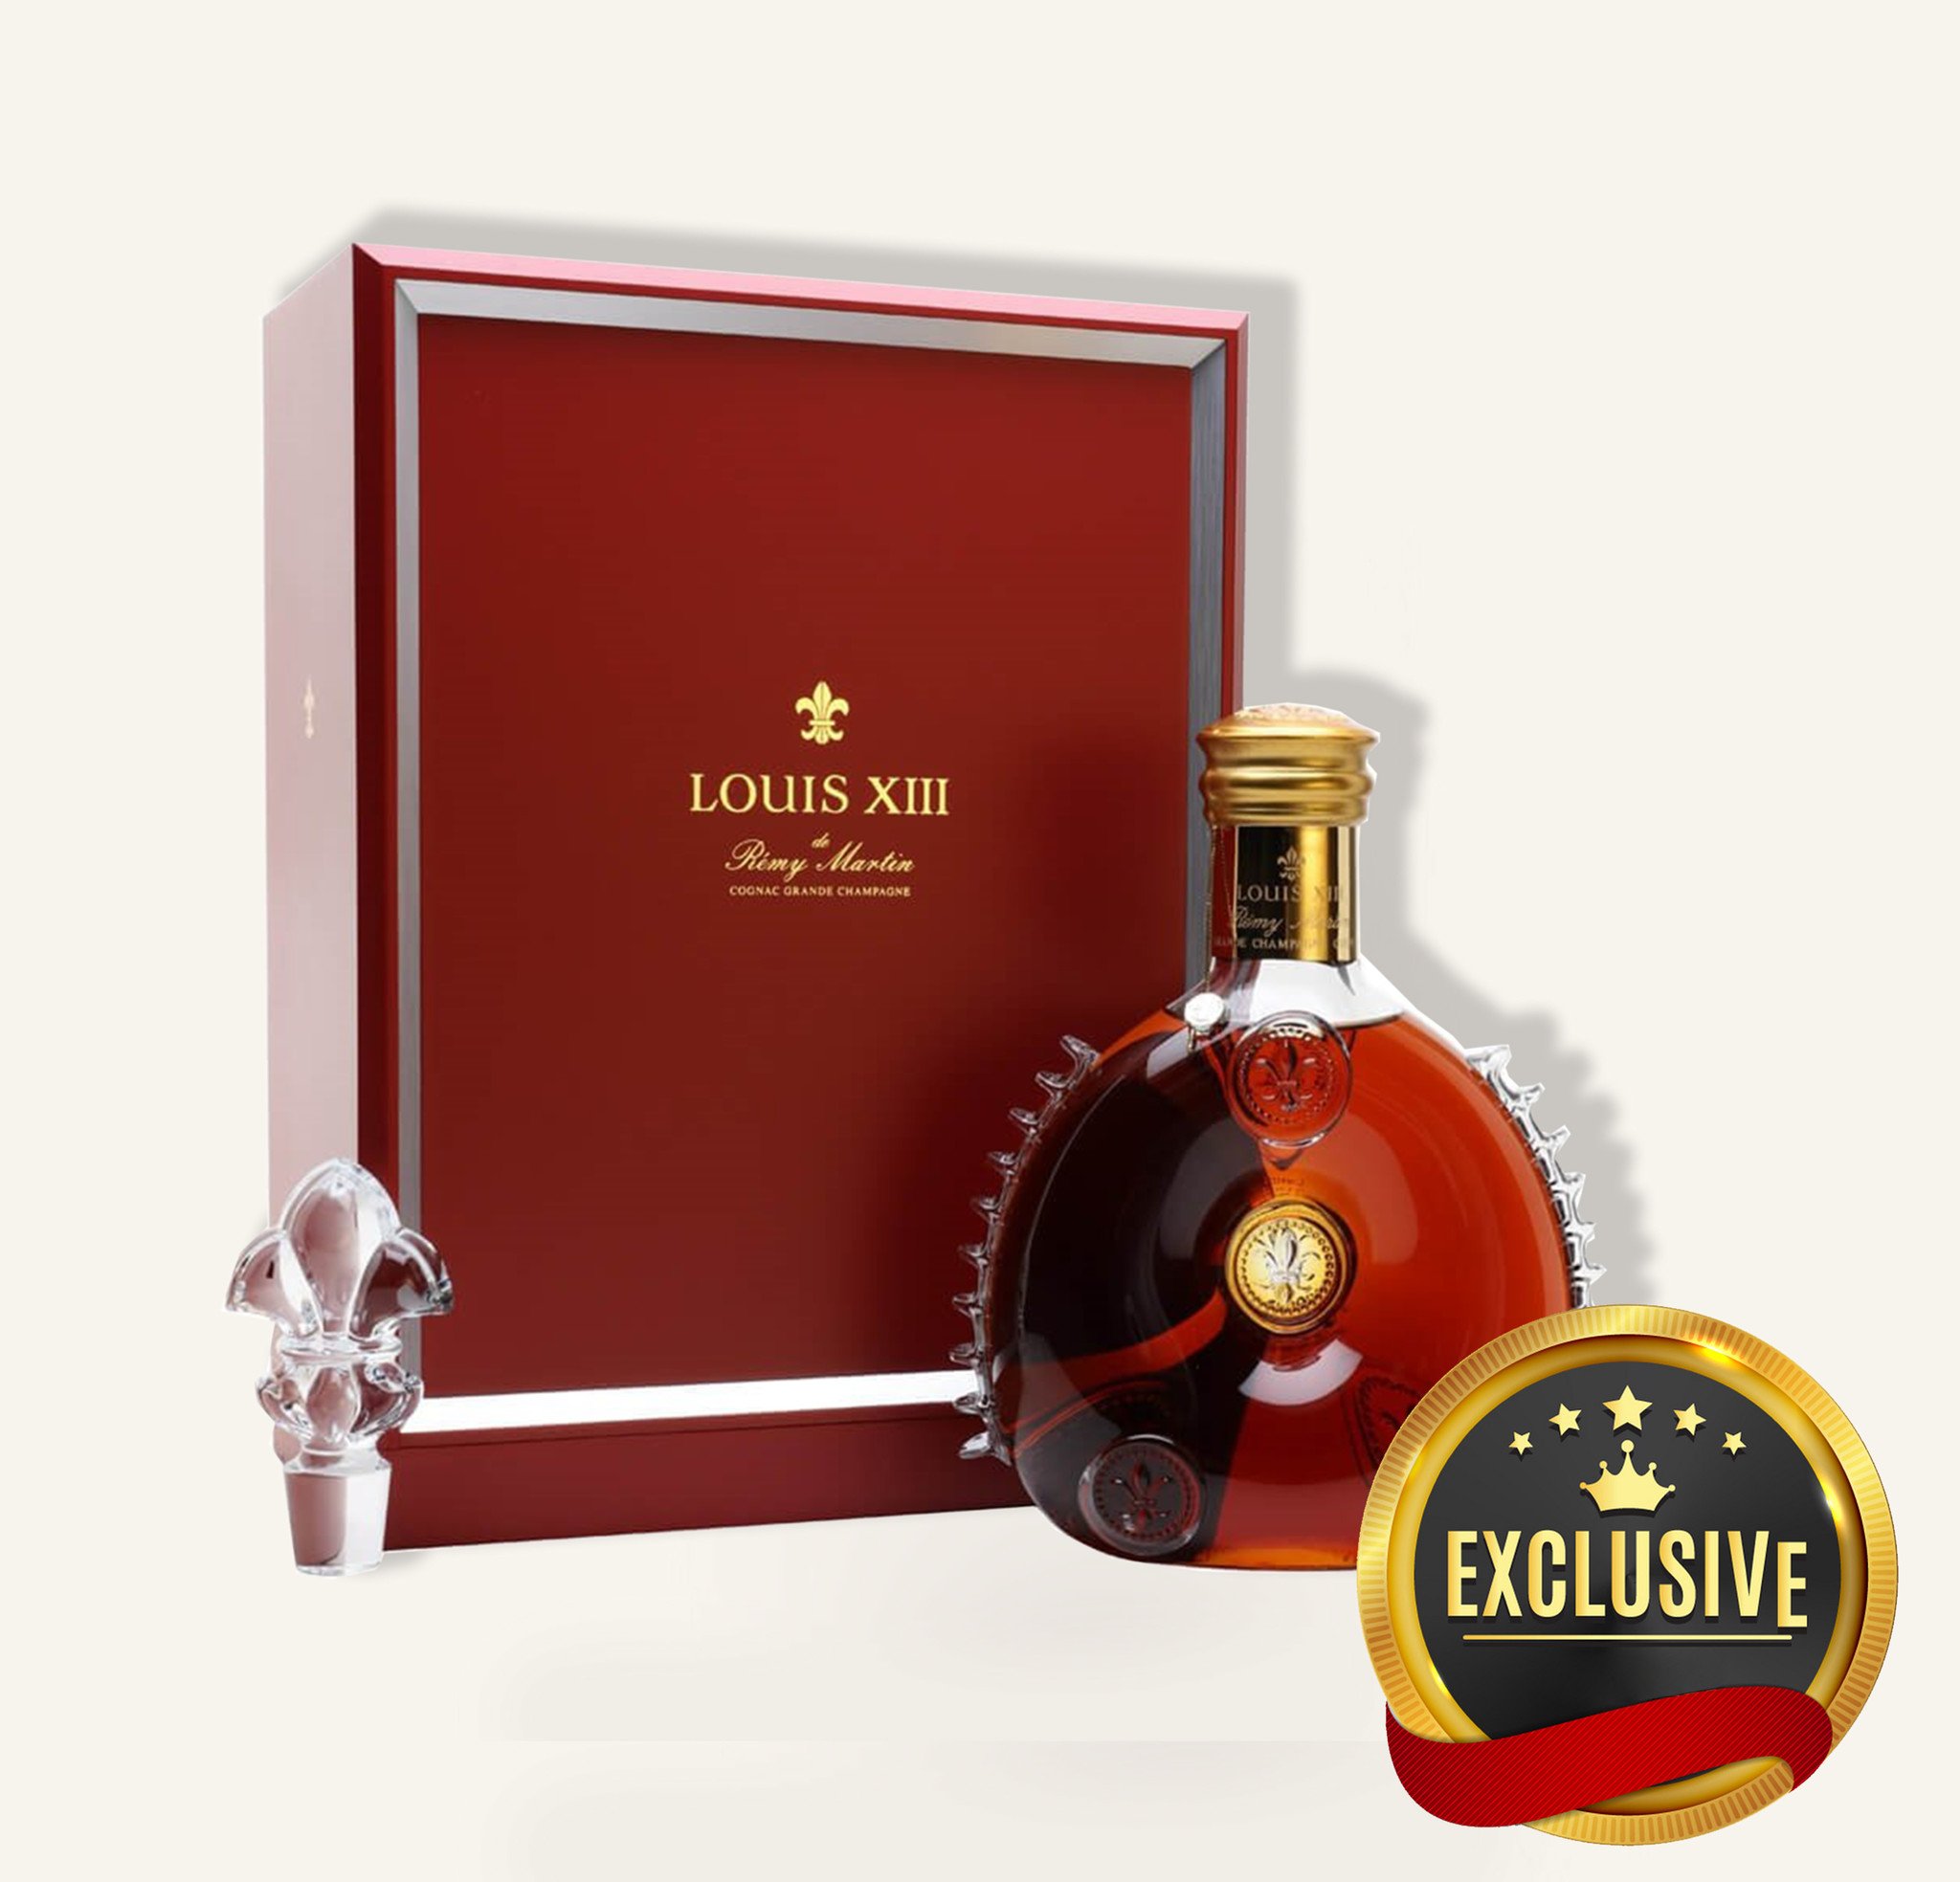 Rémy Martin Louis XIII Cognac 700ml $3900 FREE DELIVERY - Uncle 